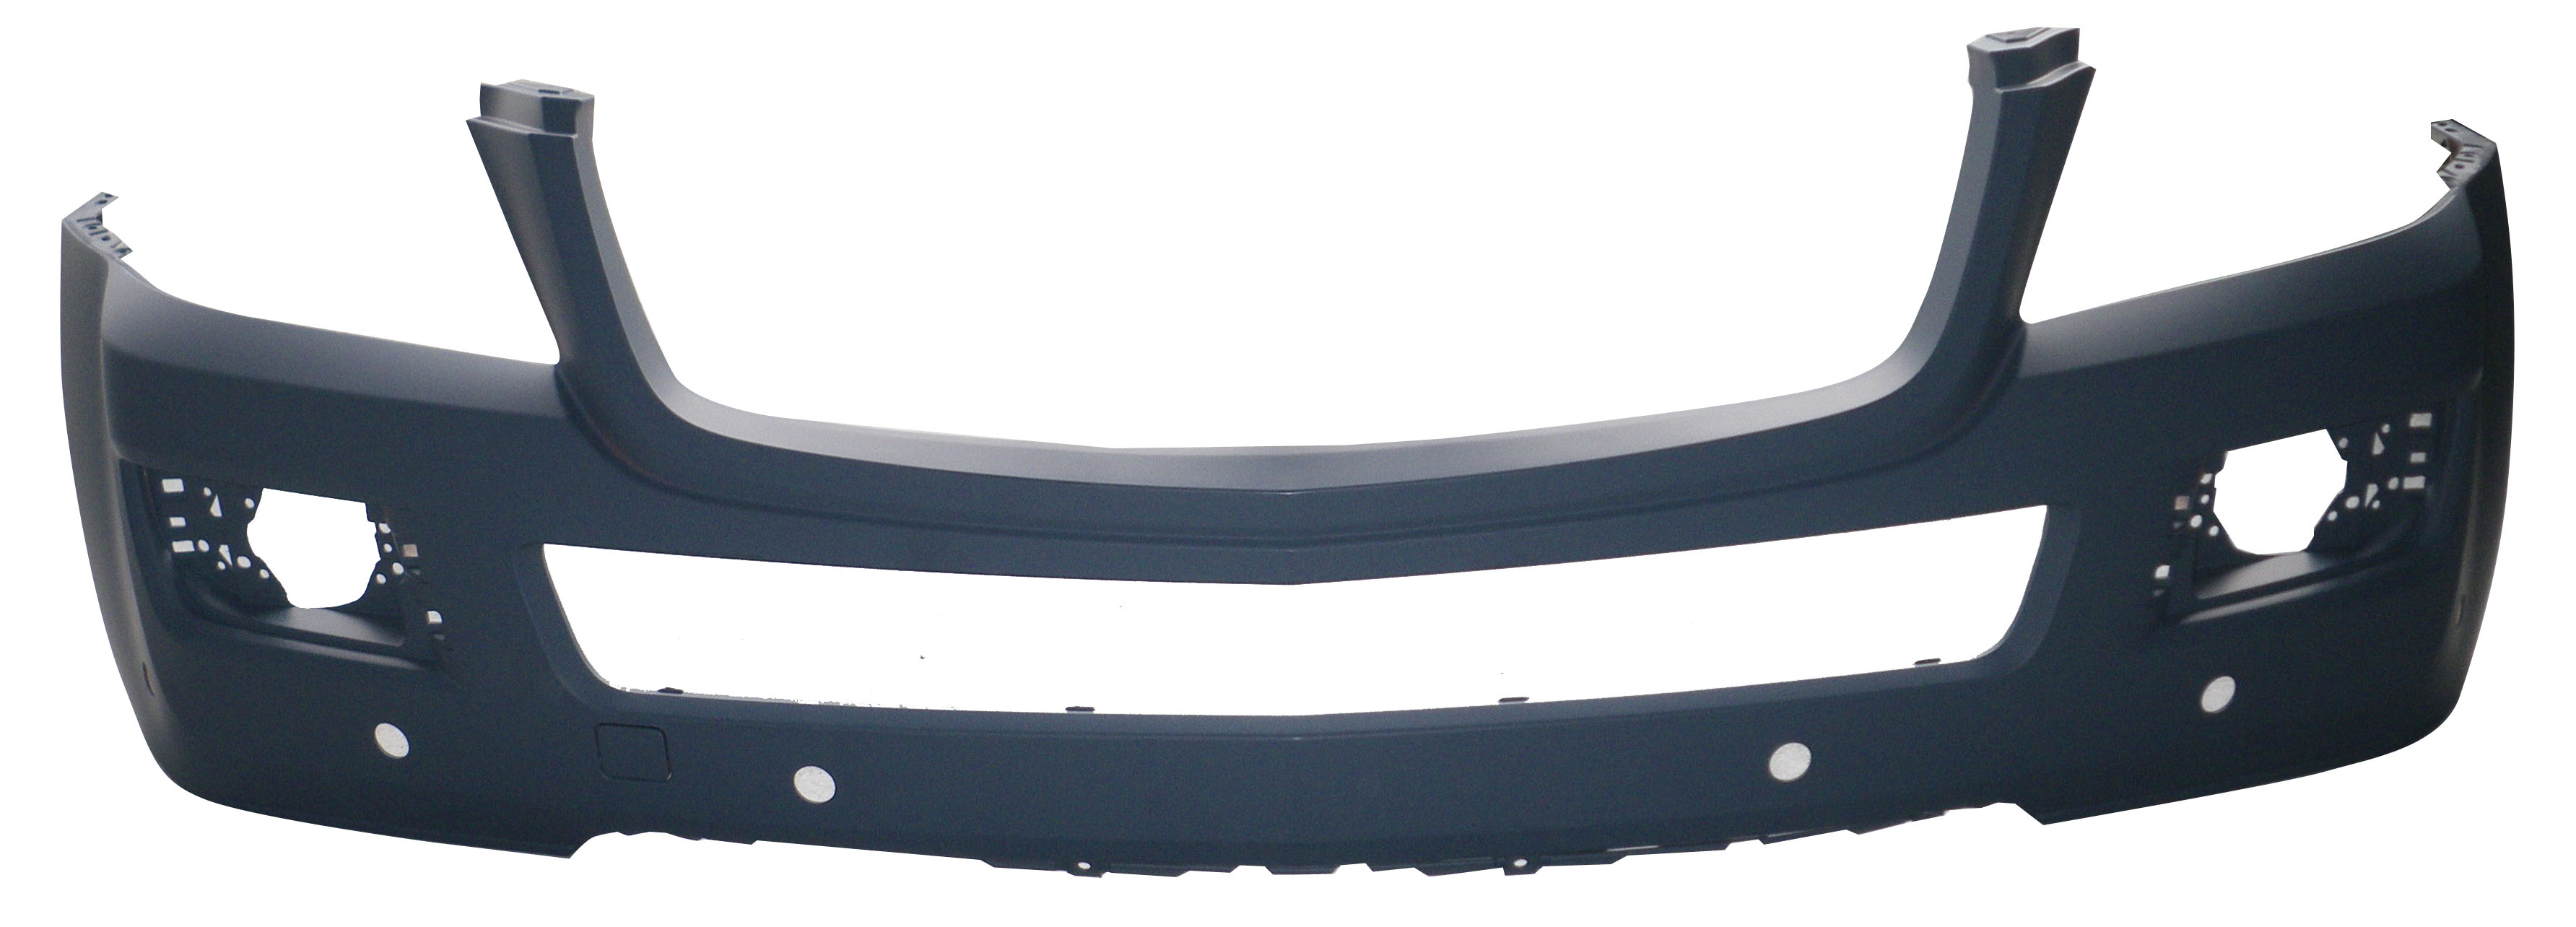 Aftermarket BUMPER COVERS for MERCEDES-BENZ - GL450, GL450,07-09,Front bumper cover